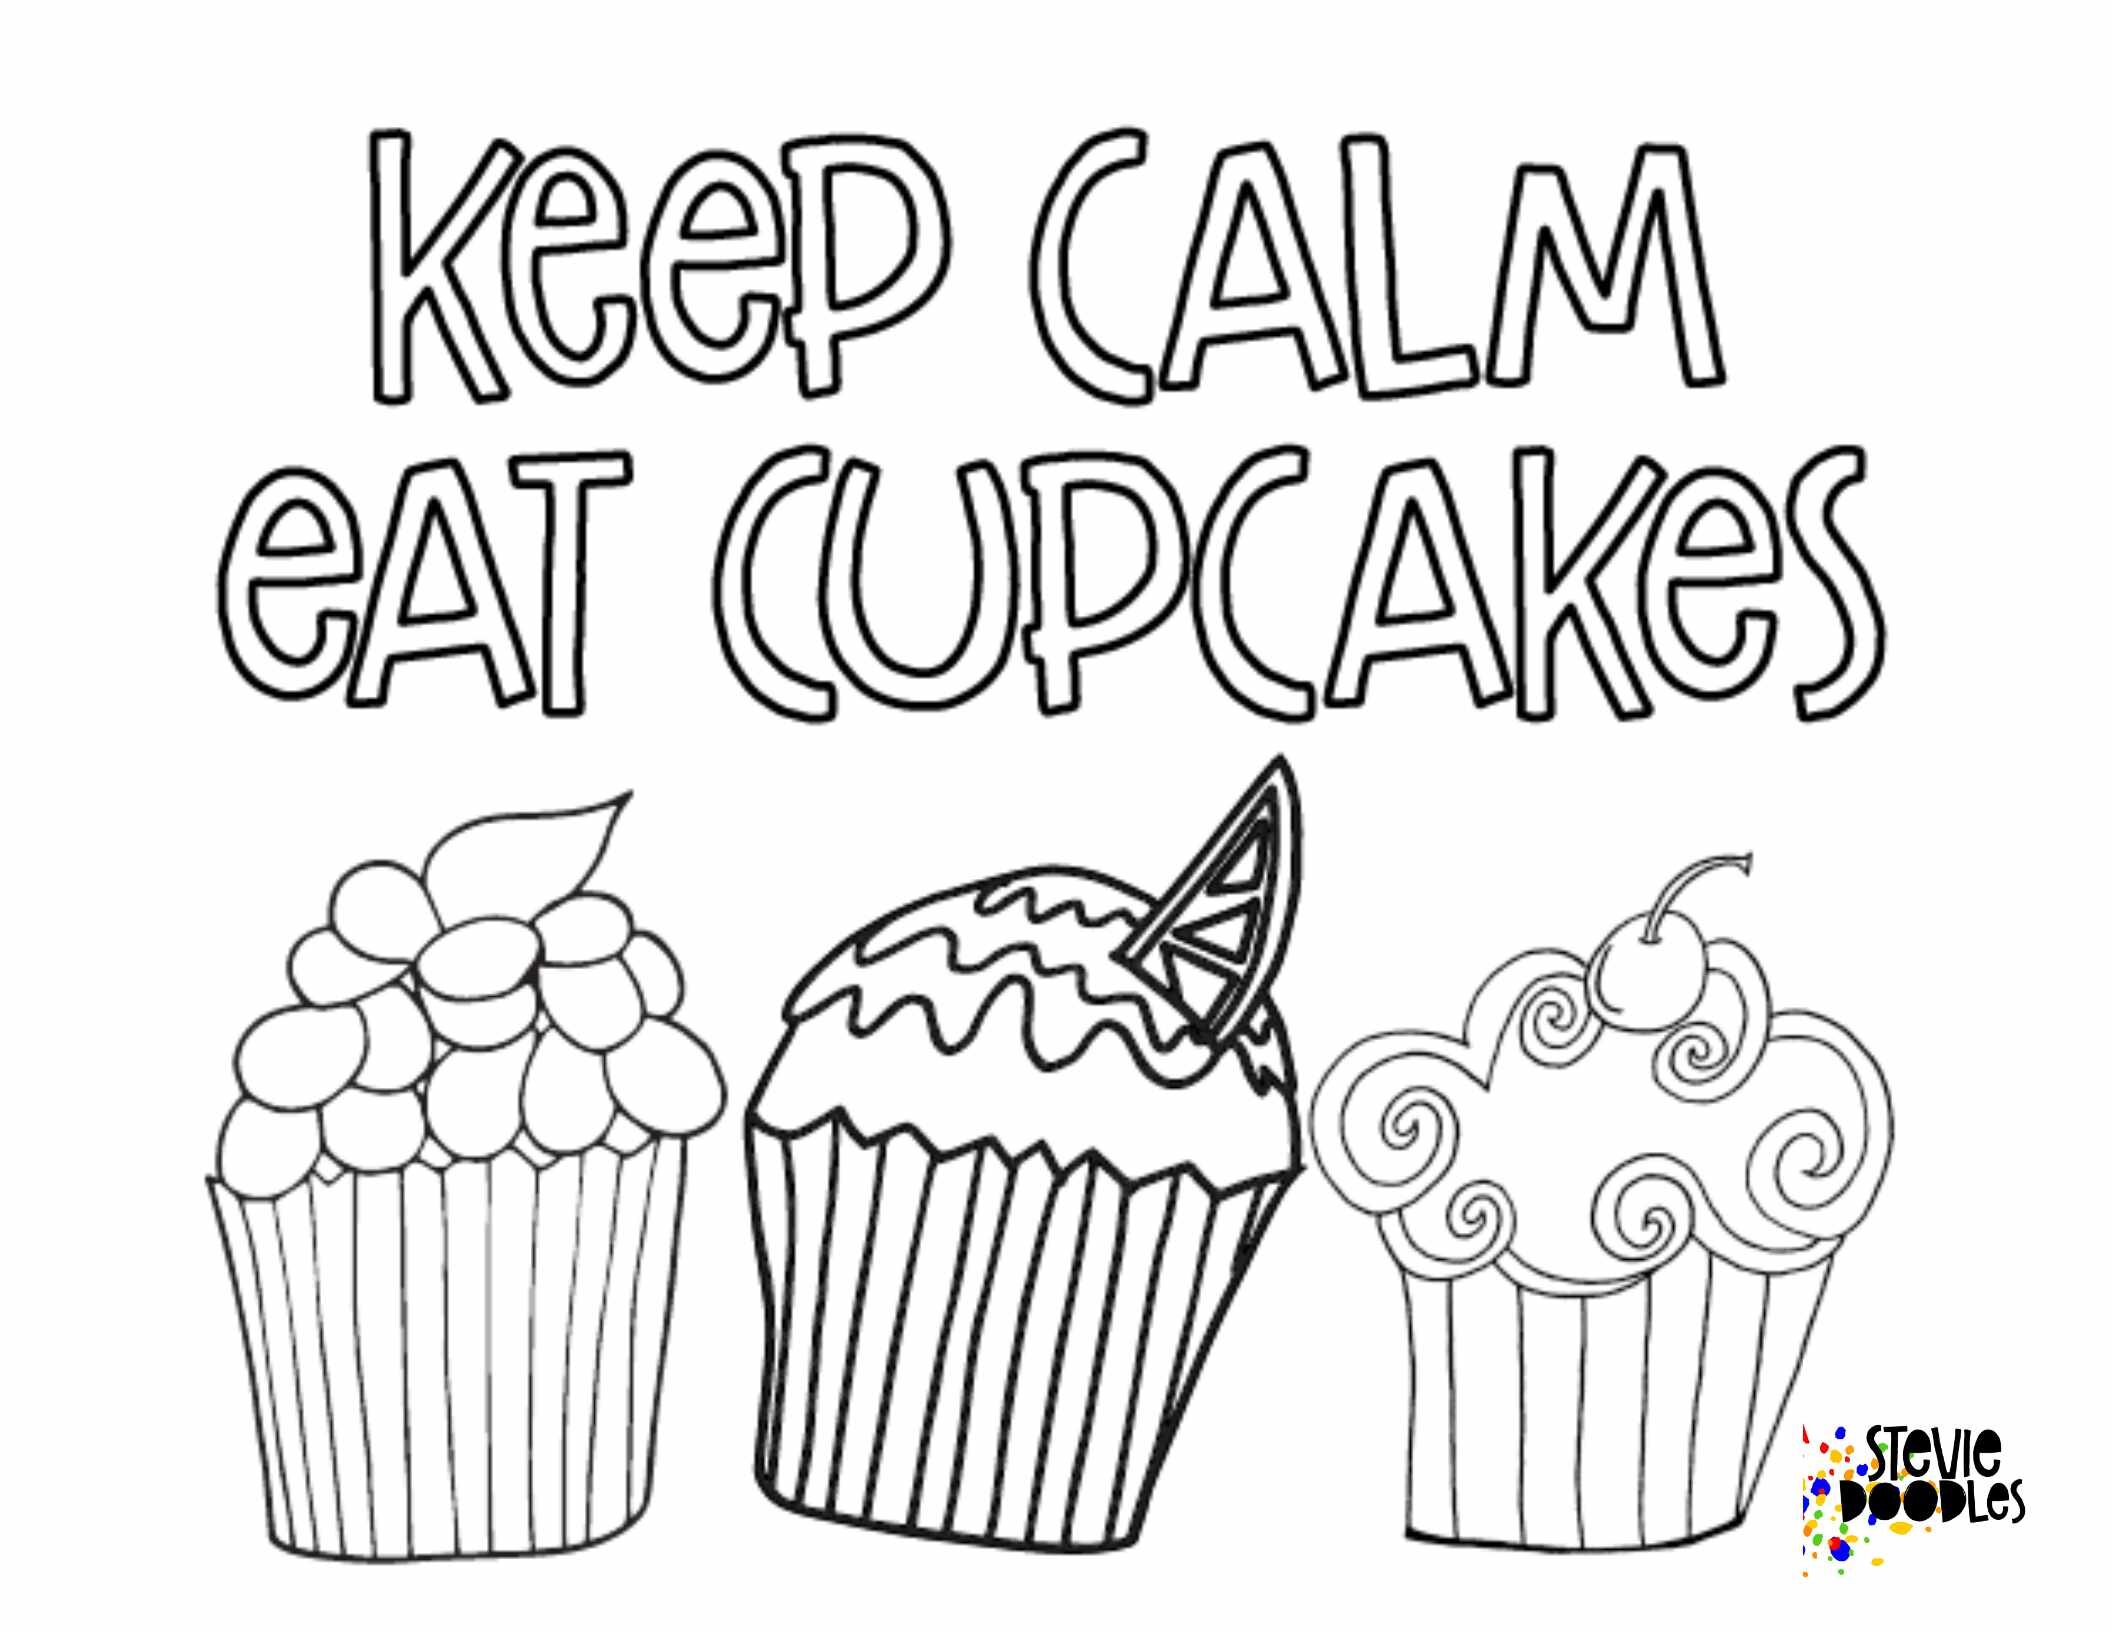 Cupcake Coloring book for Adults: A Positive & Uplifting